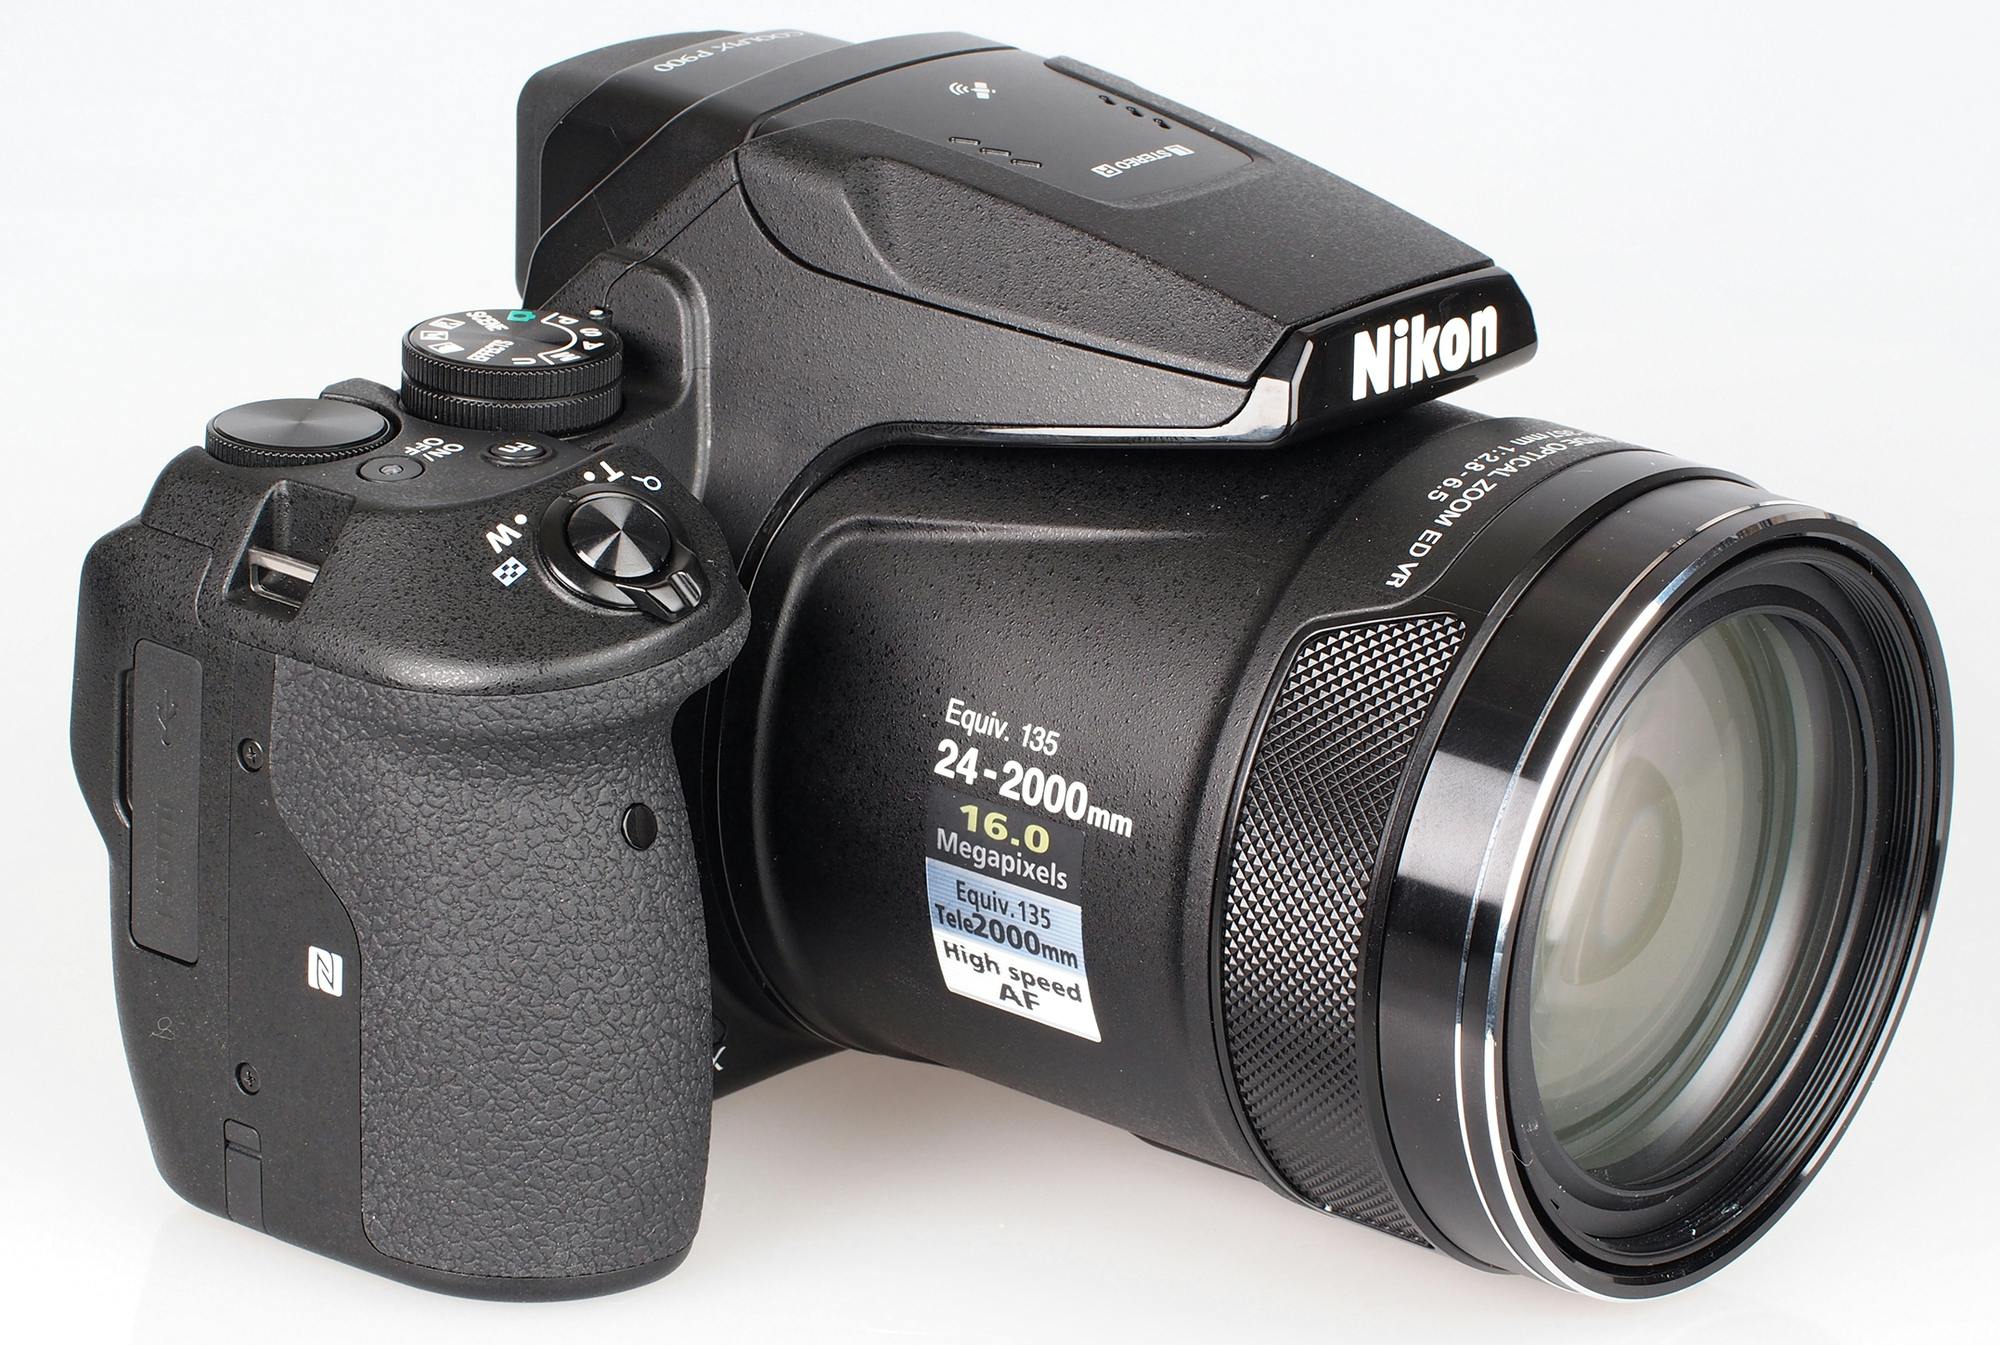 The Nikon P900 digital model could be your last camera